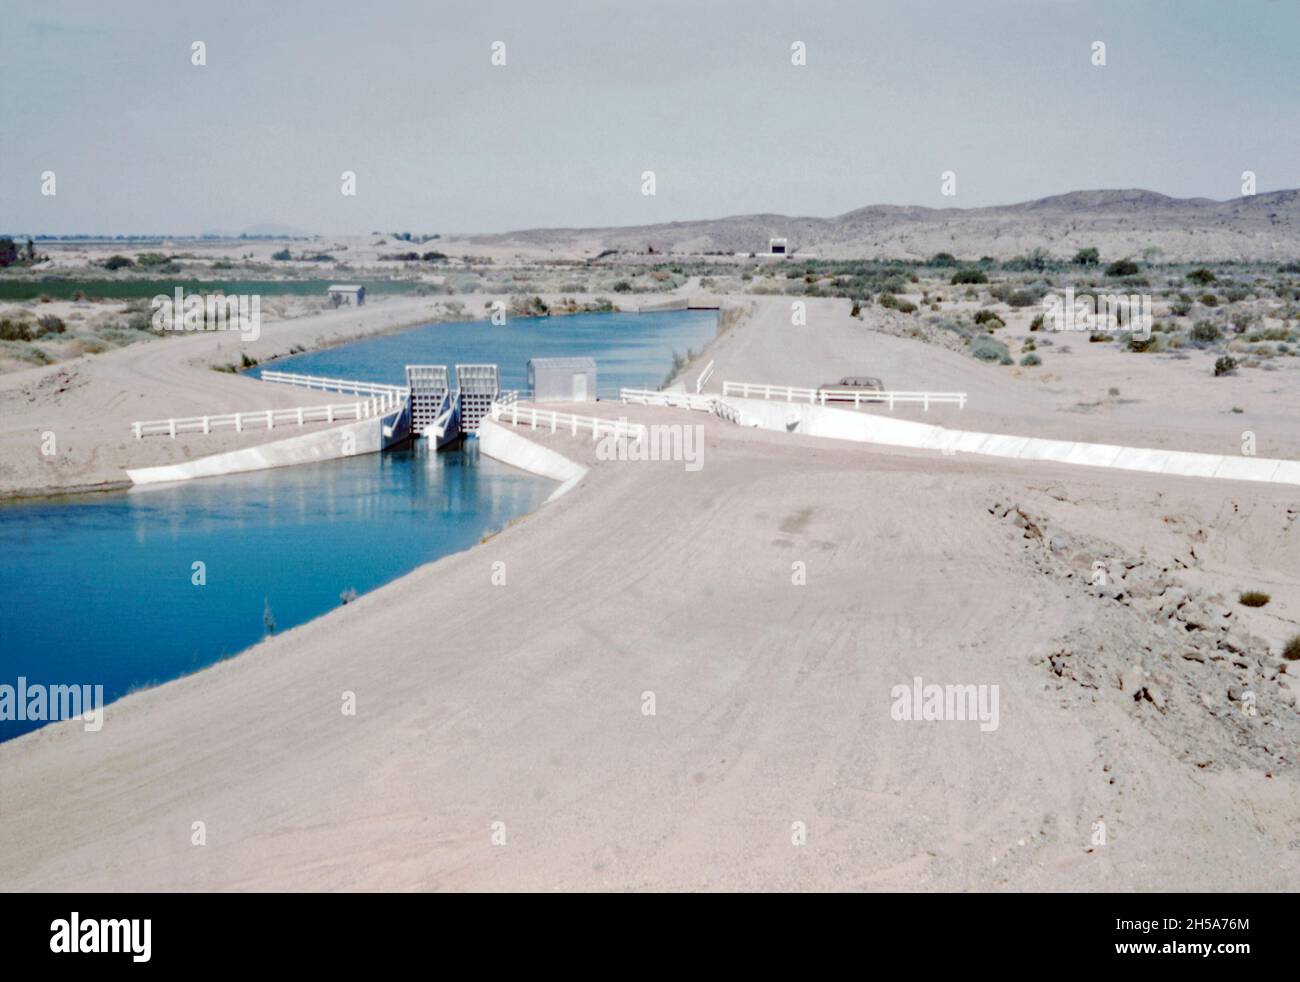 The Wellton-Mohawk canal, near Yuma, Arizona, USA in the early 1950s. Here a canal ‘turnout’ is now in water. The Wellton-Mohawk Irrigation and Drainage District is located in south-west Arizona, east of Yuma, built between 1949 and 1957. It allows the irrigation in the Lower Gila valley with water from the Colorado river via the Gila Canal to the Wellton-Mohawk Canal, where it is pumped around 160 feet to the headwaters – a vintage 1950s photograph. Stock Photo